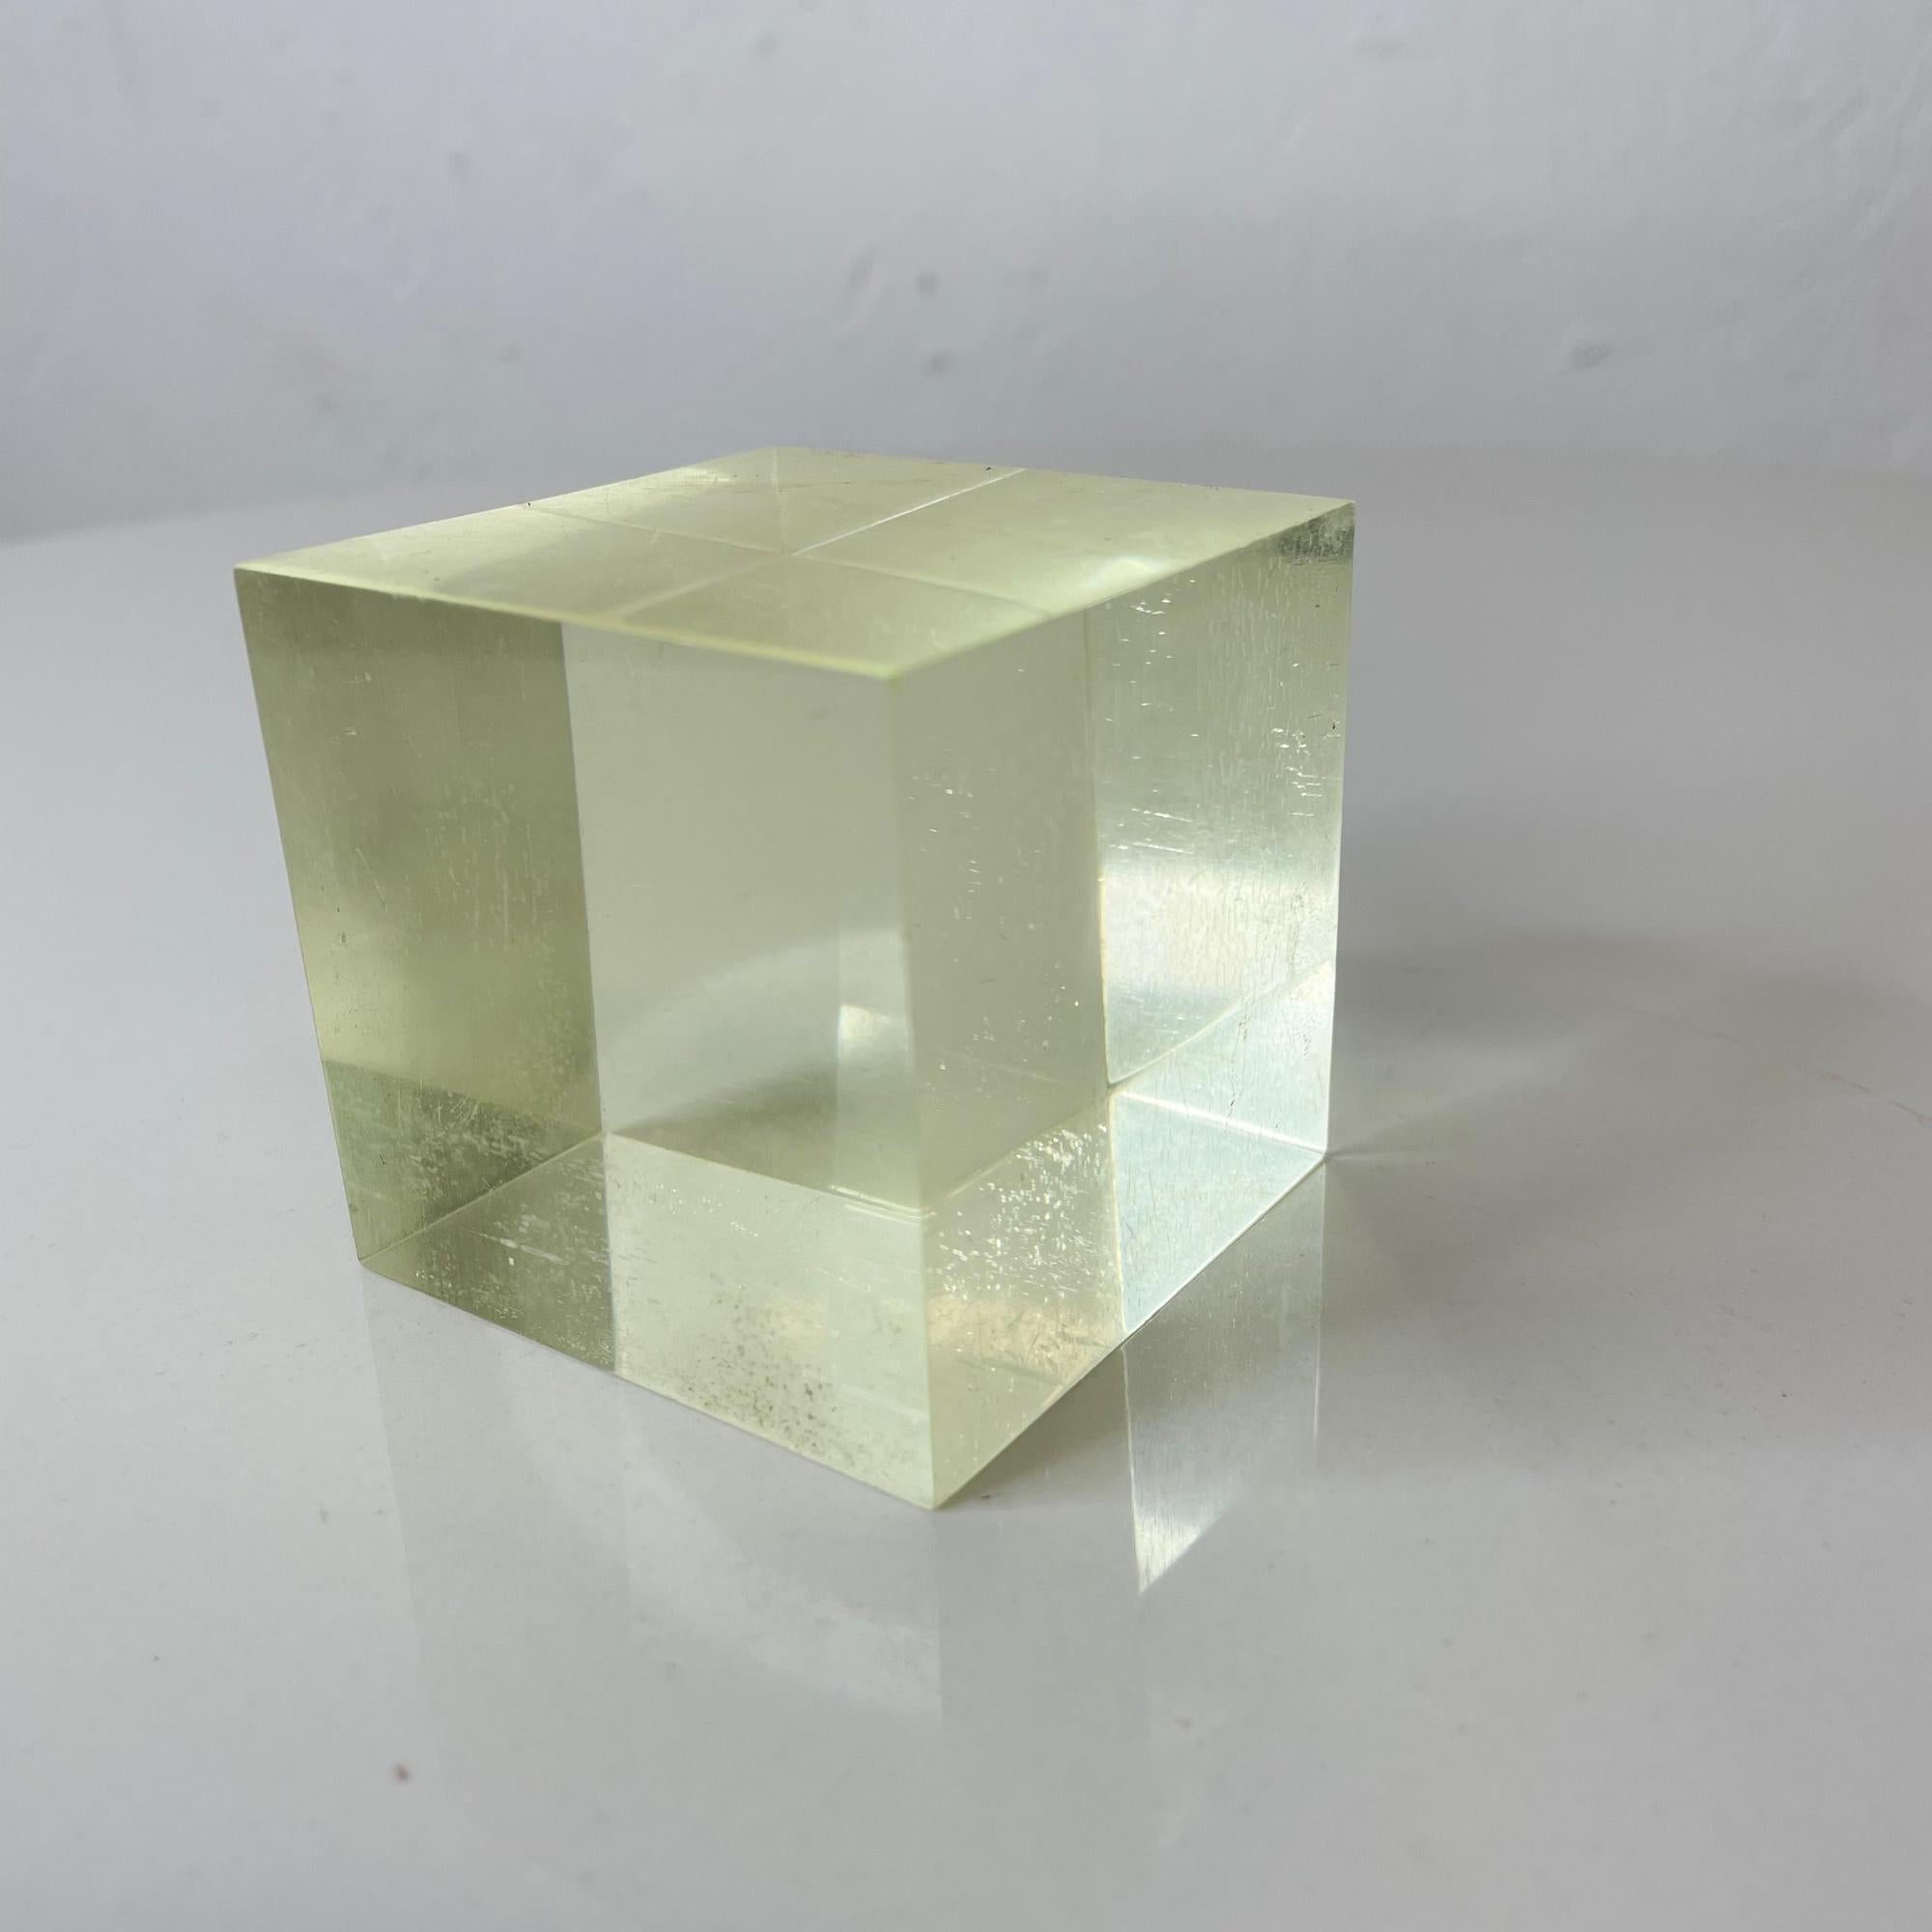 Modern vintage Lucite paperweight Cube 1970s
Geometric design styled after Team Guzzini Italy.
Unmarked.
Measures: 2.25 x 2.25 x 2.25 inches
Original unrestored vintage condition. Scuffs present.
See images please.

    